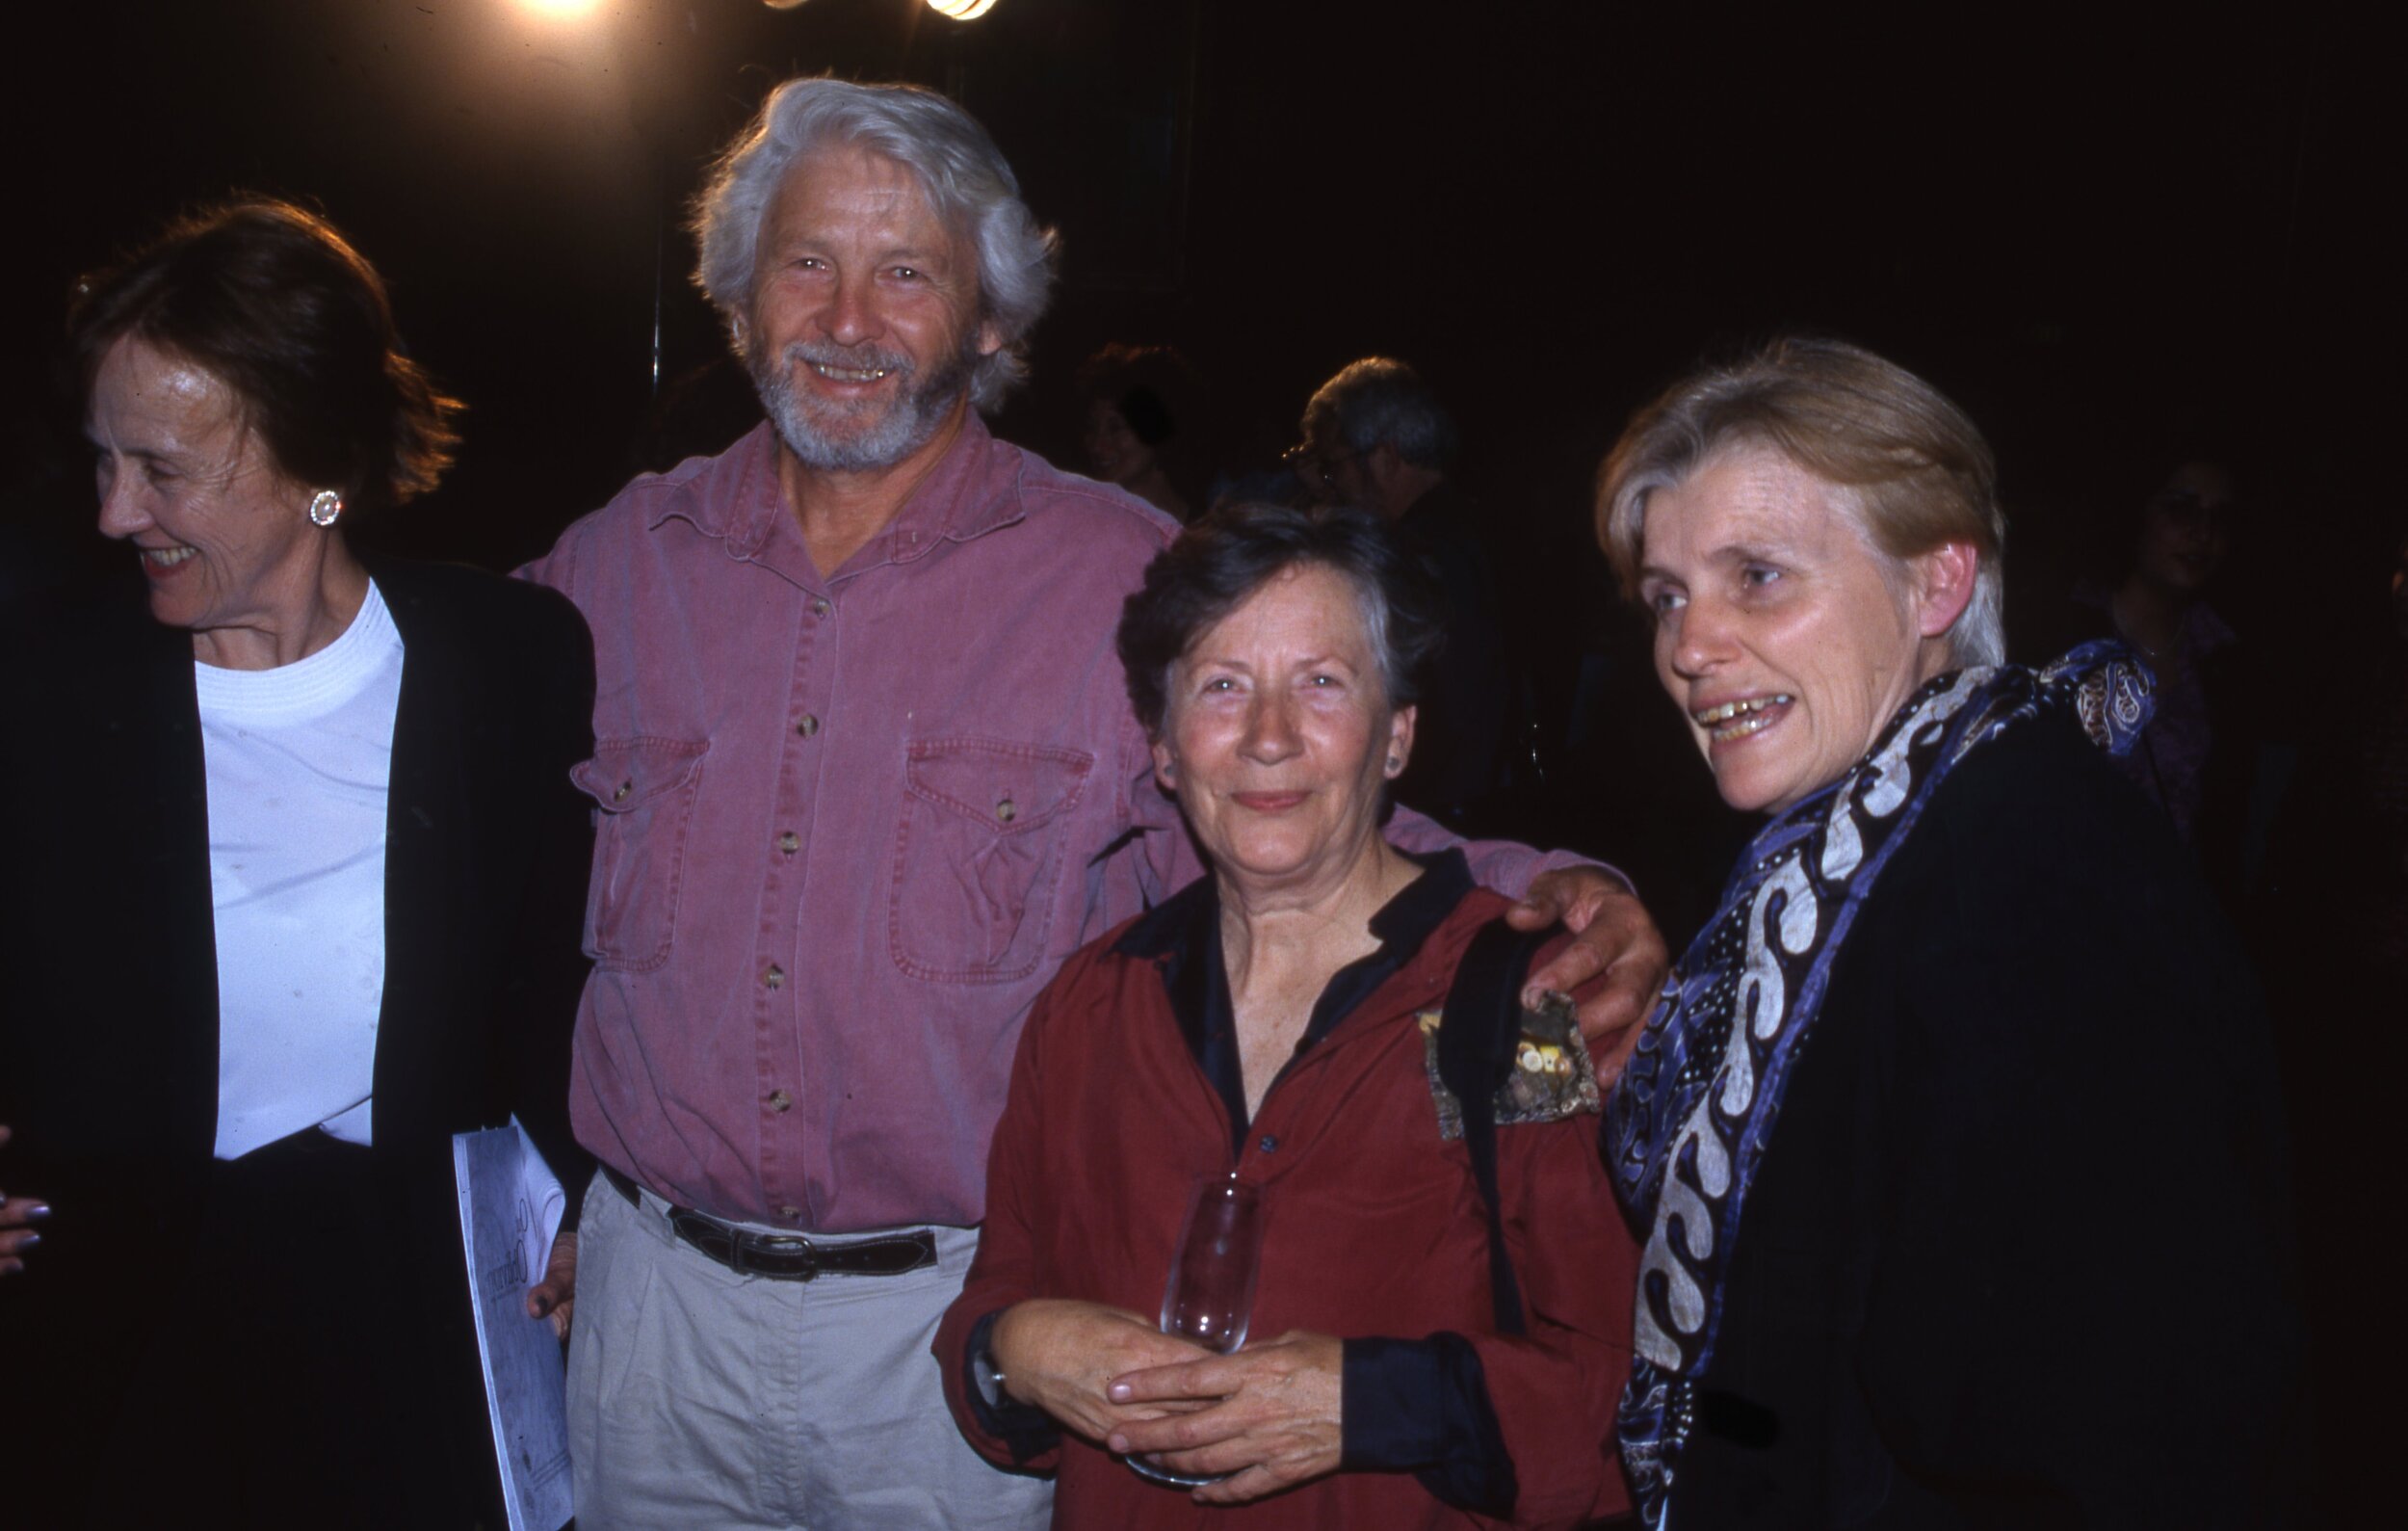  Guests at the opening of  Images, Vestiges, Shadows,  1996. They are (L-R): Poet and writer Kate Lllewellyn, Grahame Bartholomew, visual artist Liz Jeneid, and visual artist and Artist in Residence Diana Wood Conroy.  Photo: Diana Wood Conroy 